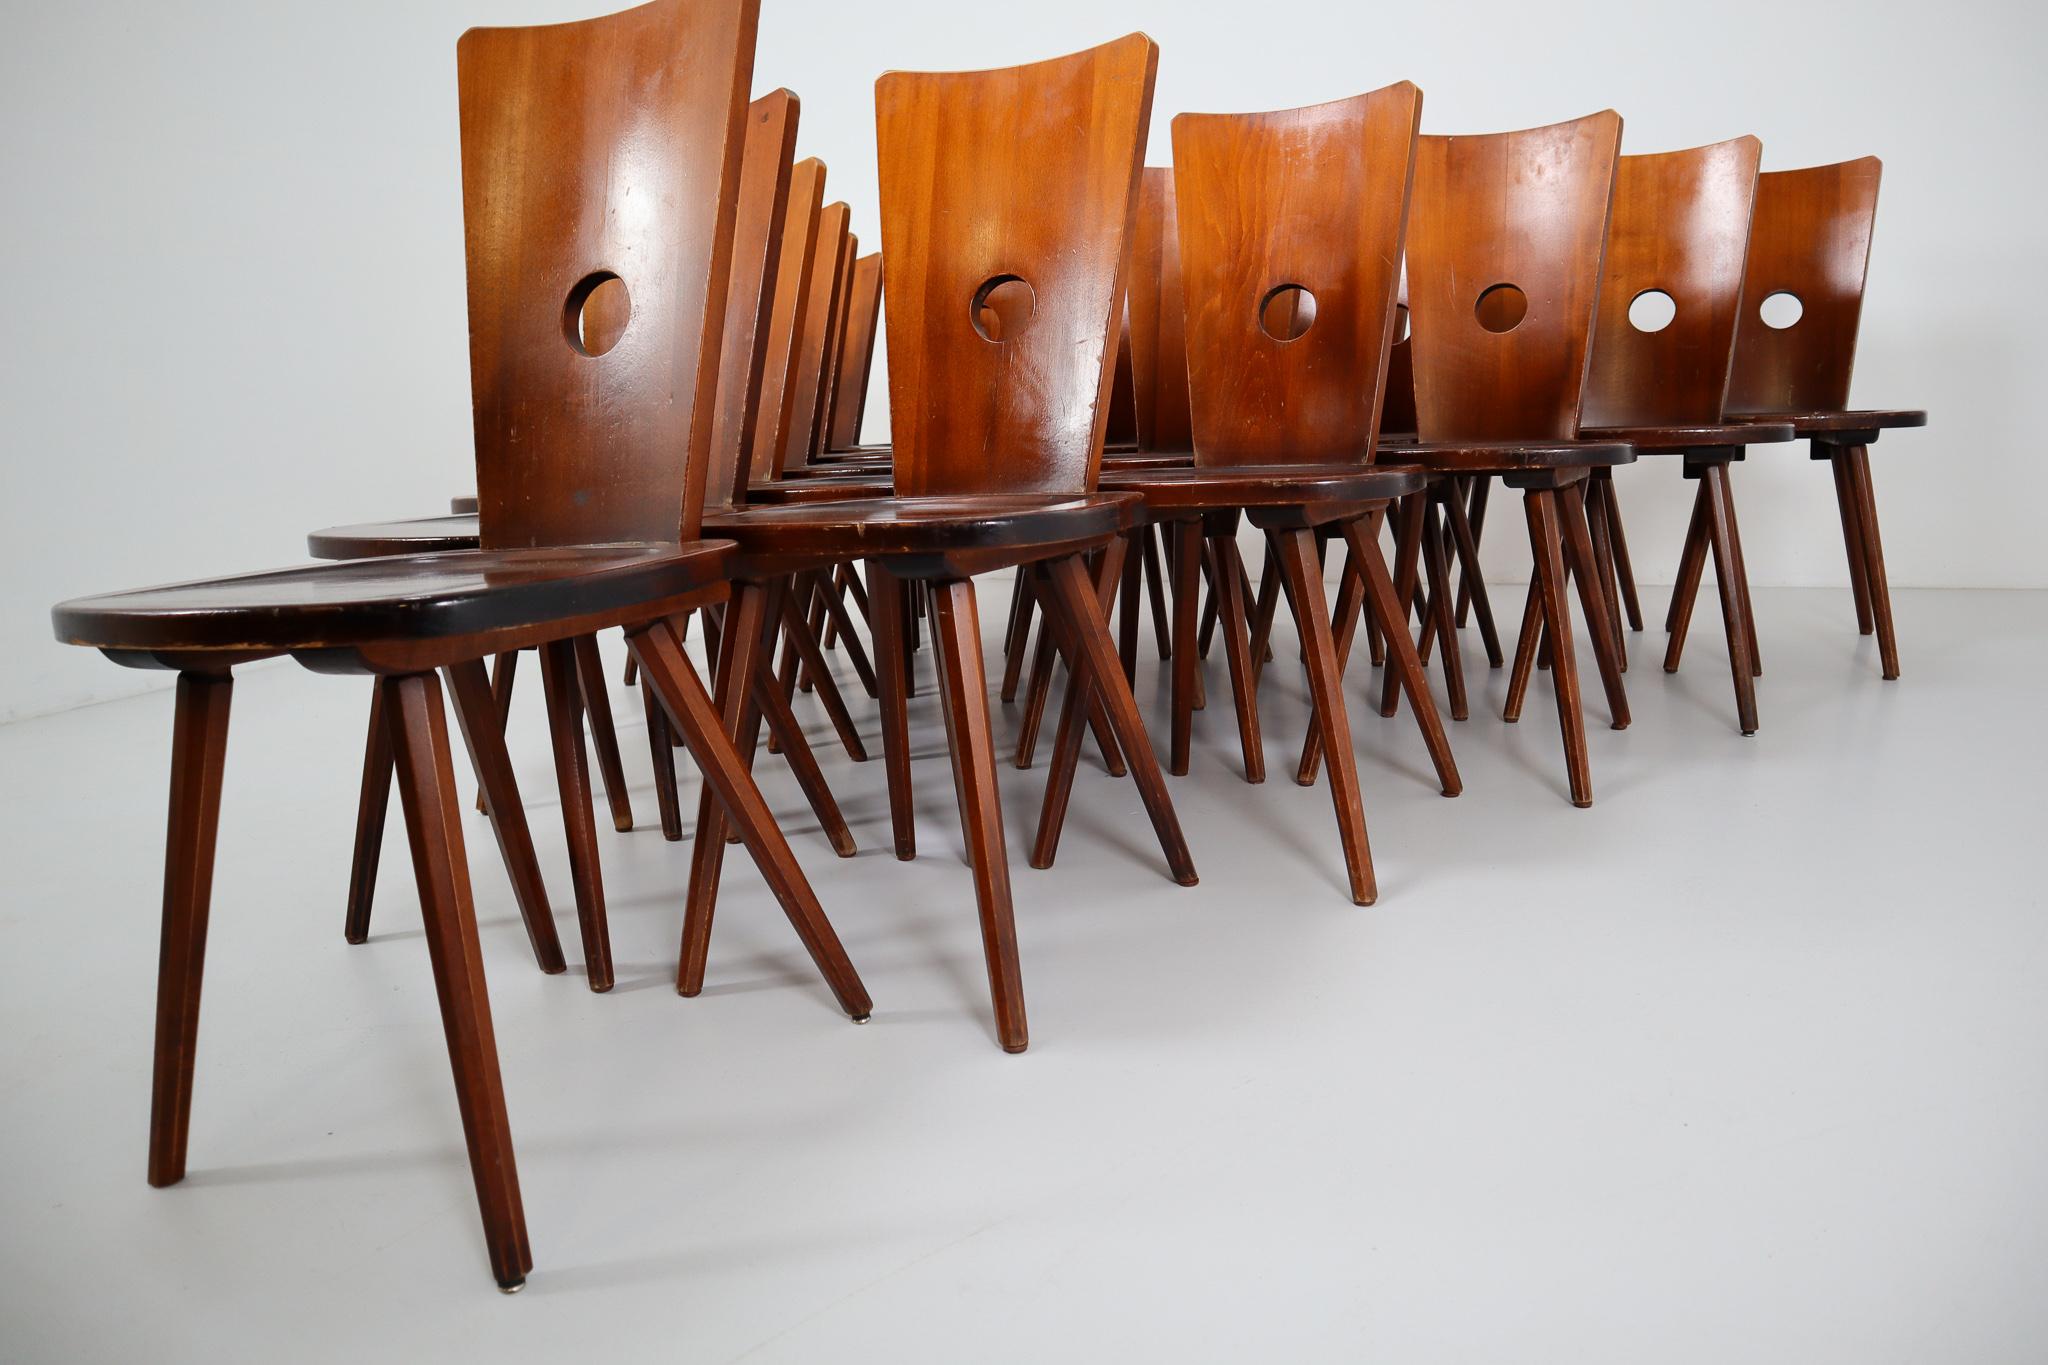 Beech Set of 22 Primitive French Wooden Chairs in the Style of Olavi Hanninen, 1950s